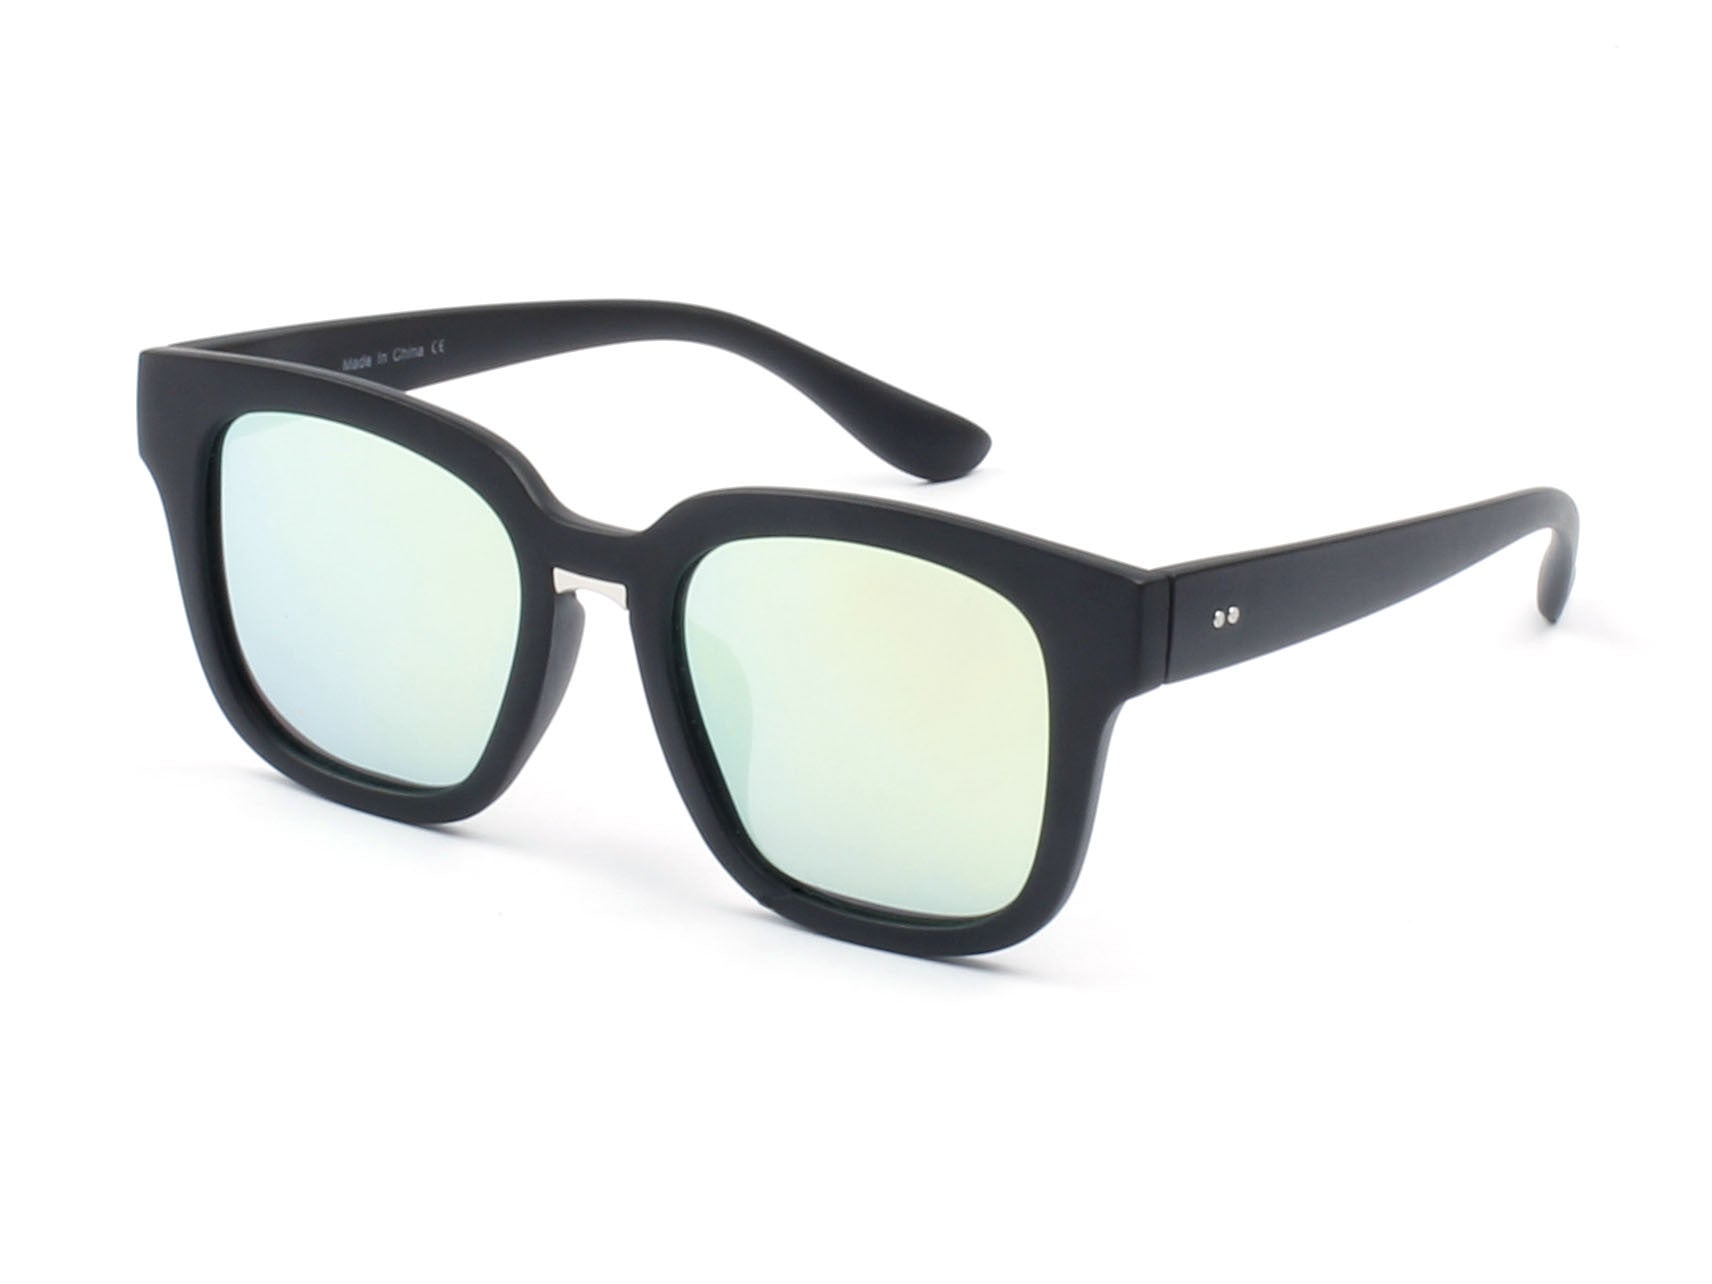 PD01 - Indie Thick Polarized Frame Square Mirrored Lens SUNGLASSES Black - Yellow Green